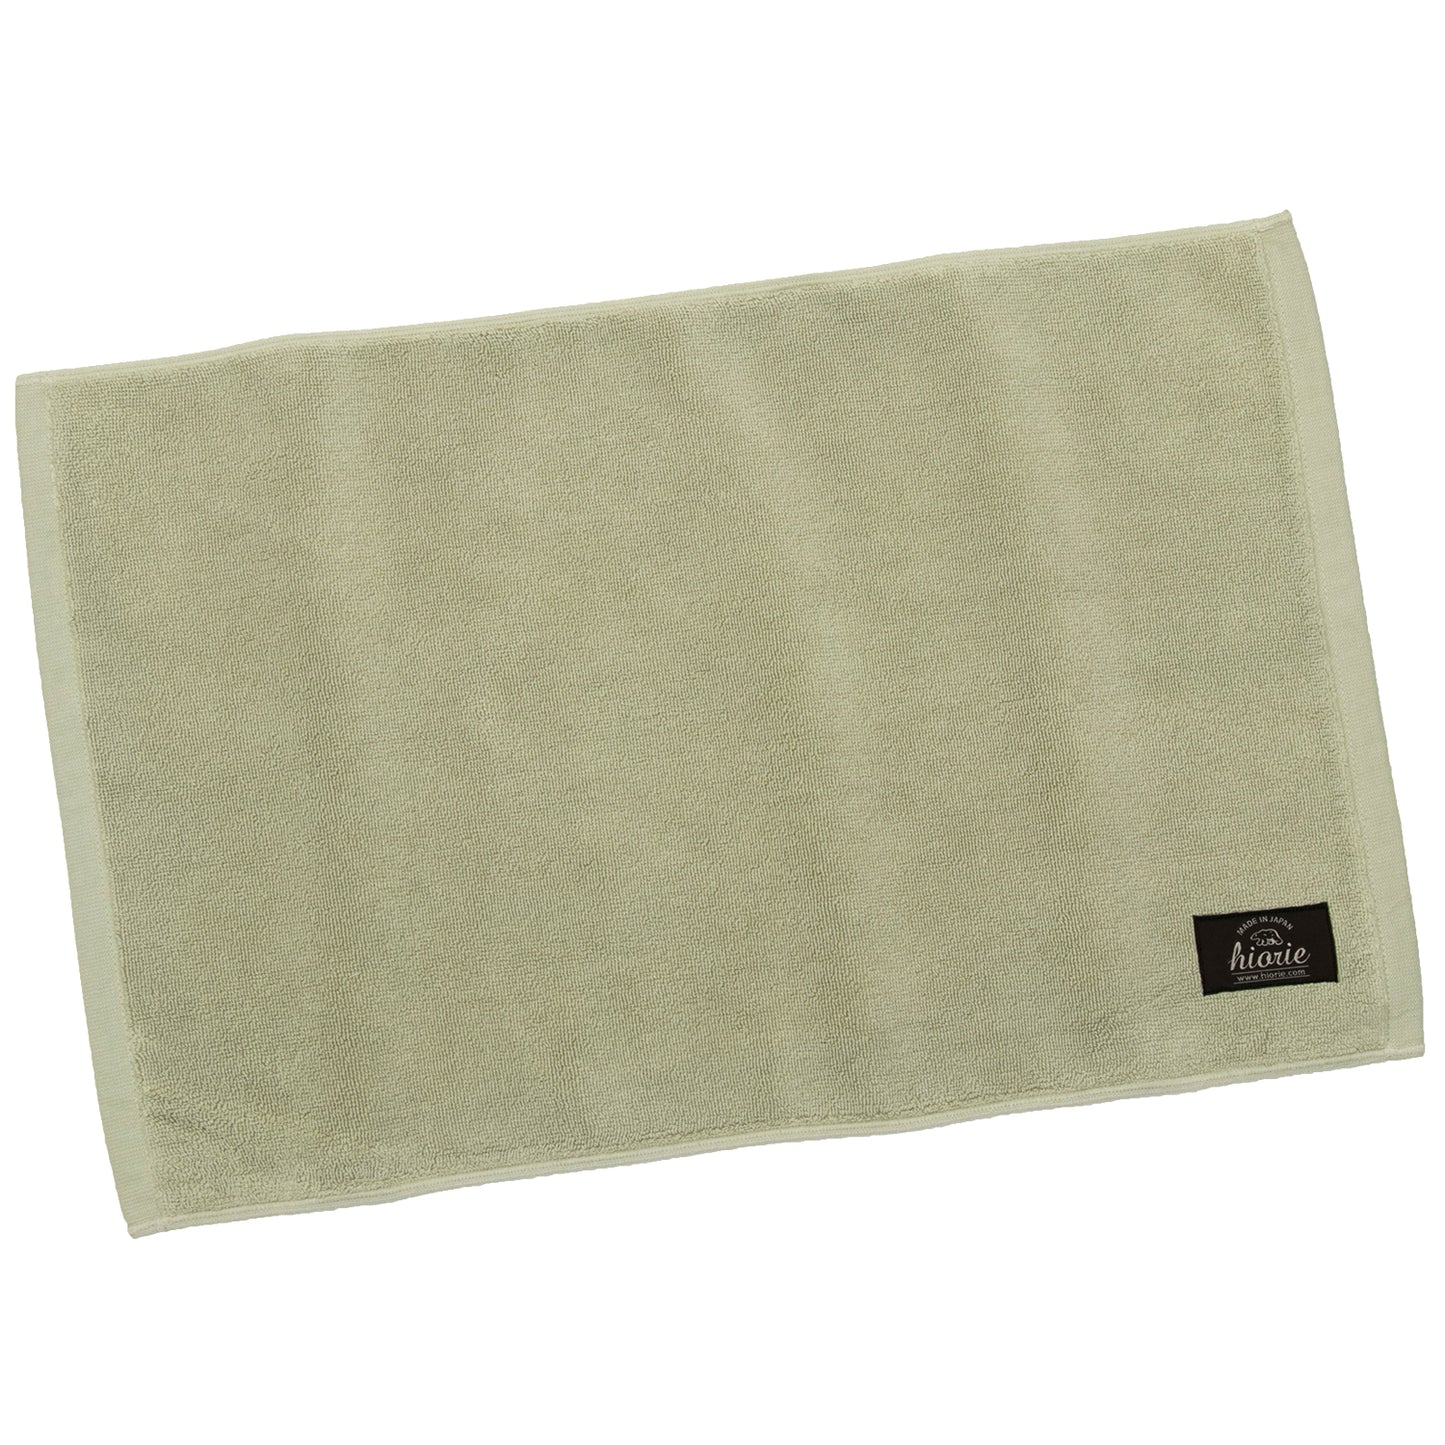 Hiorie Hotel Soft Bactericidal Water-Absorption Bath Mat 1 Sheets Cotton Japan